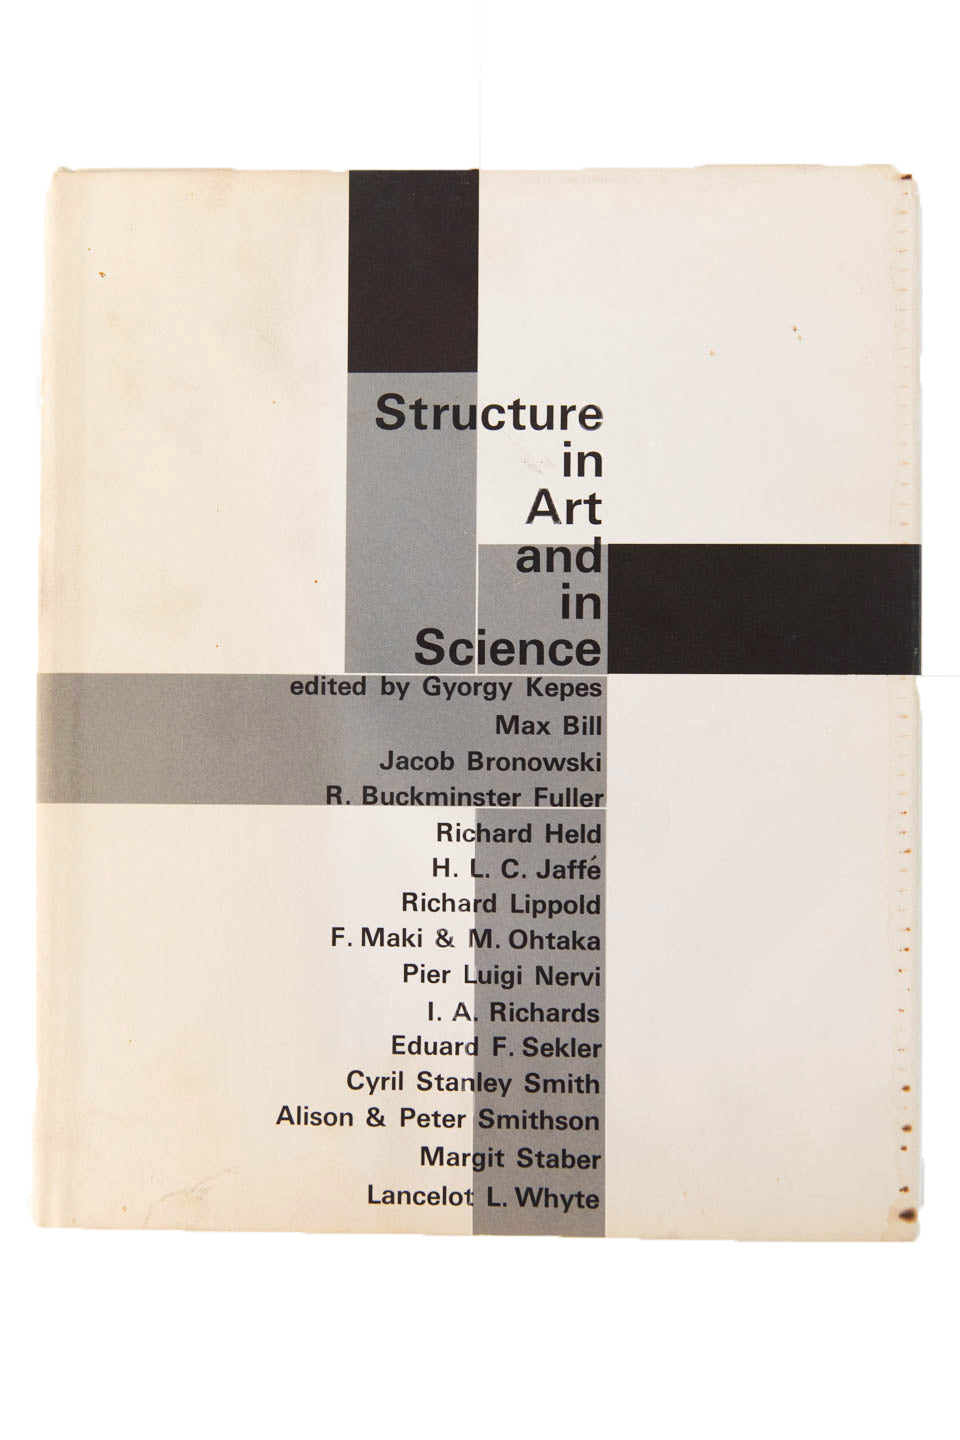 STRUCTURE IN ART AND IN SCIENCE